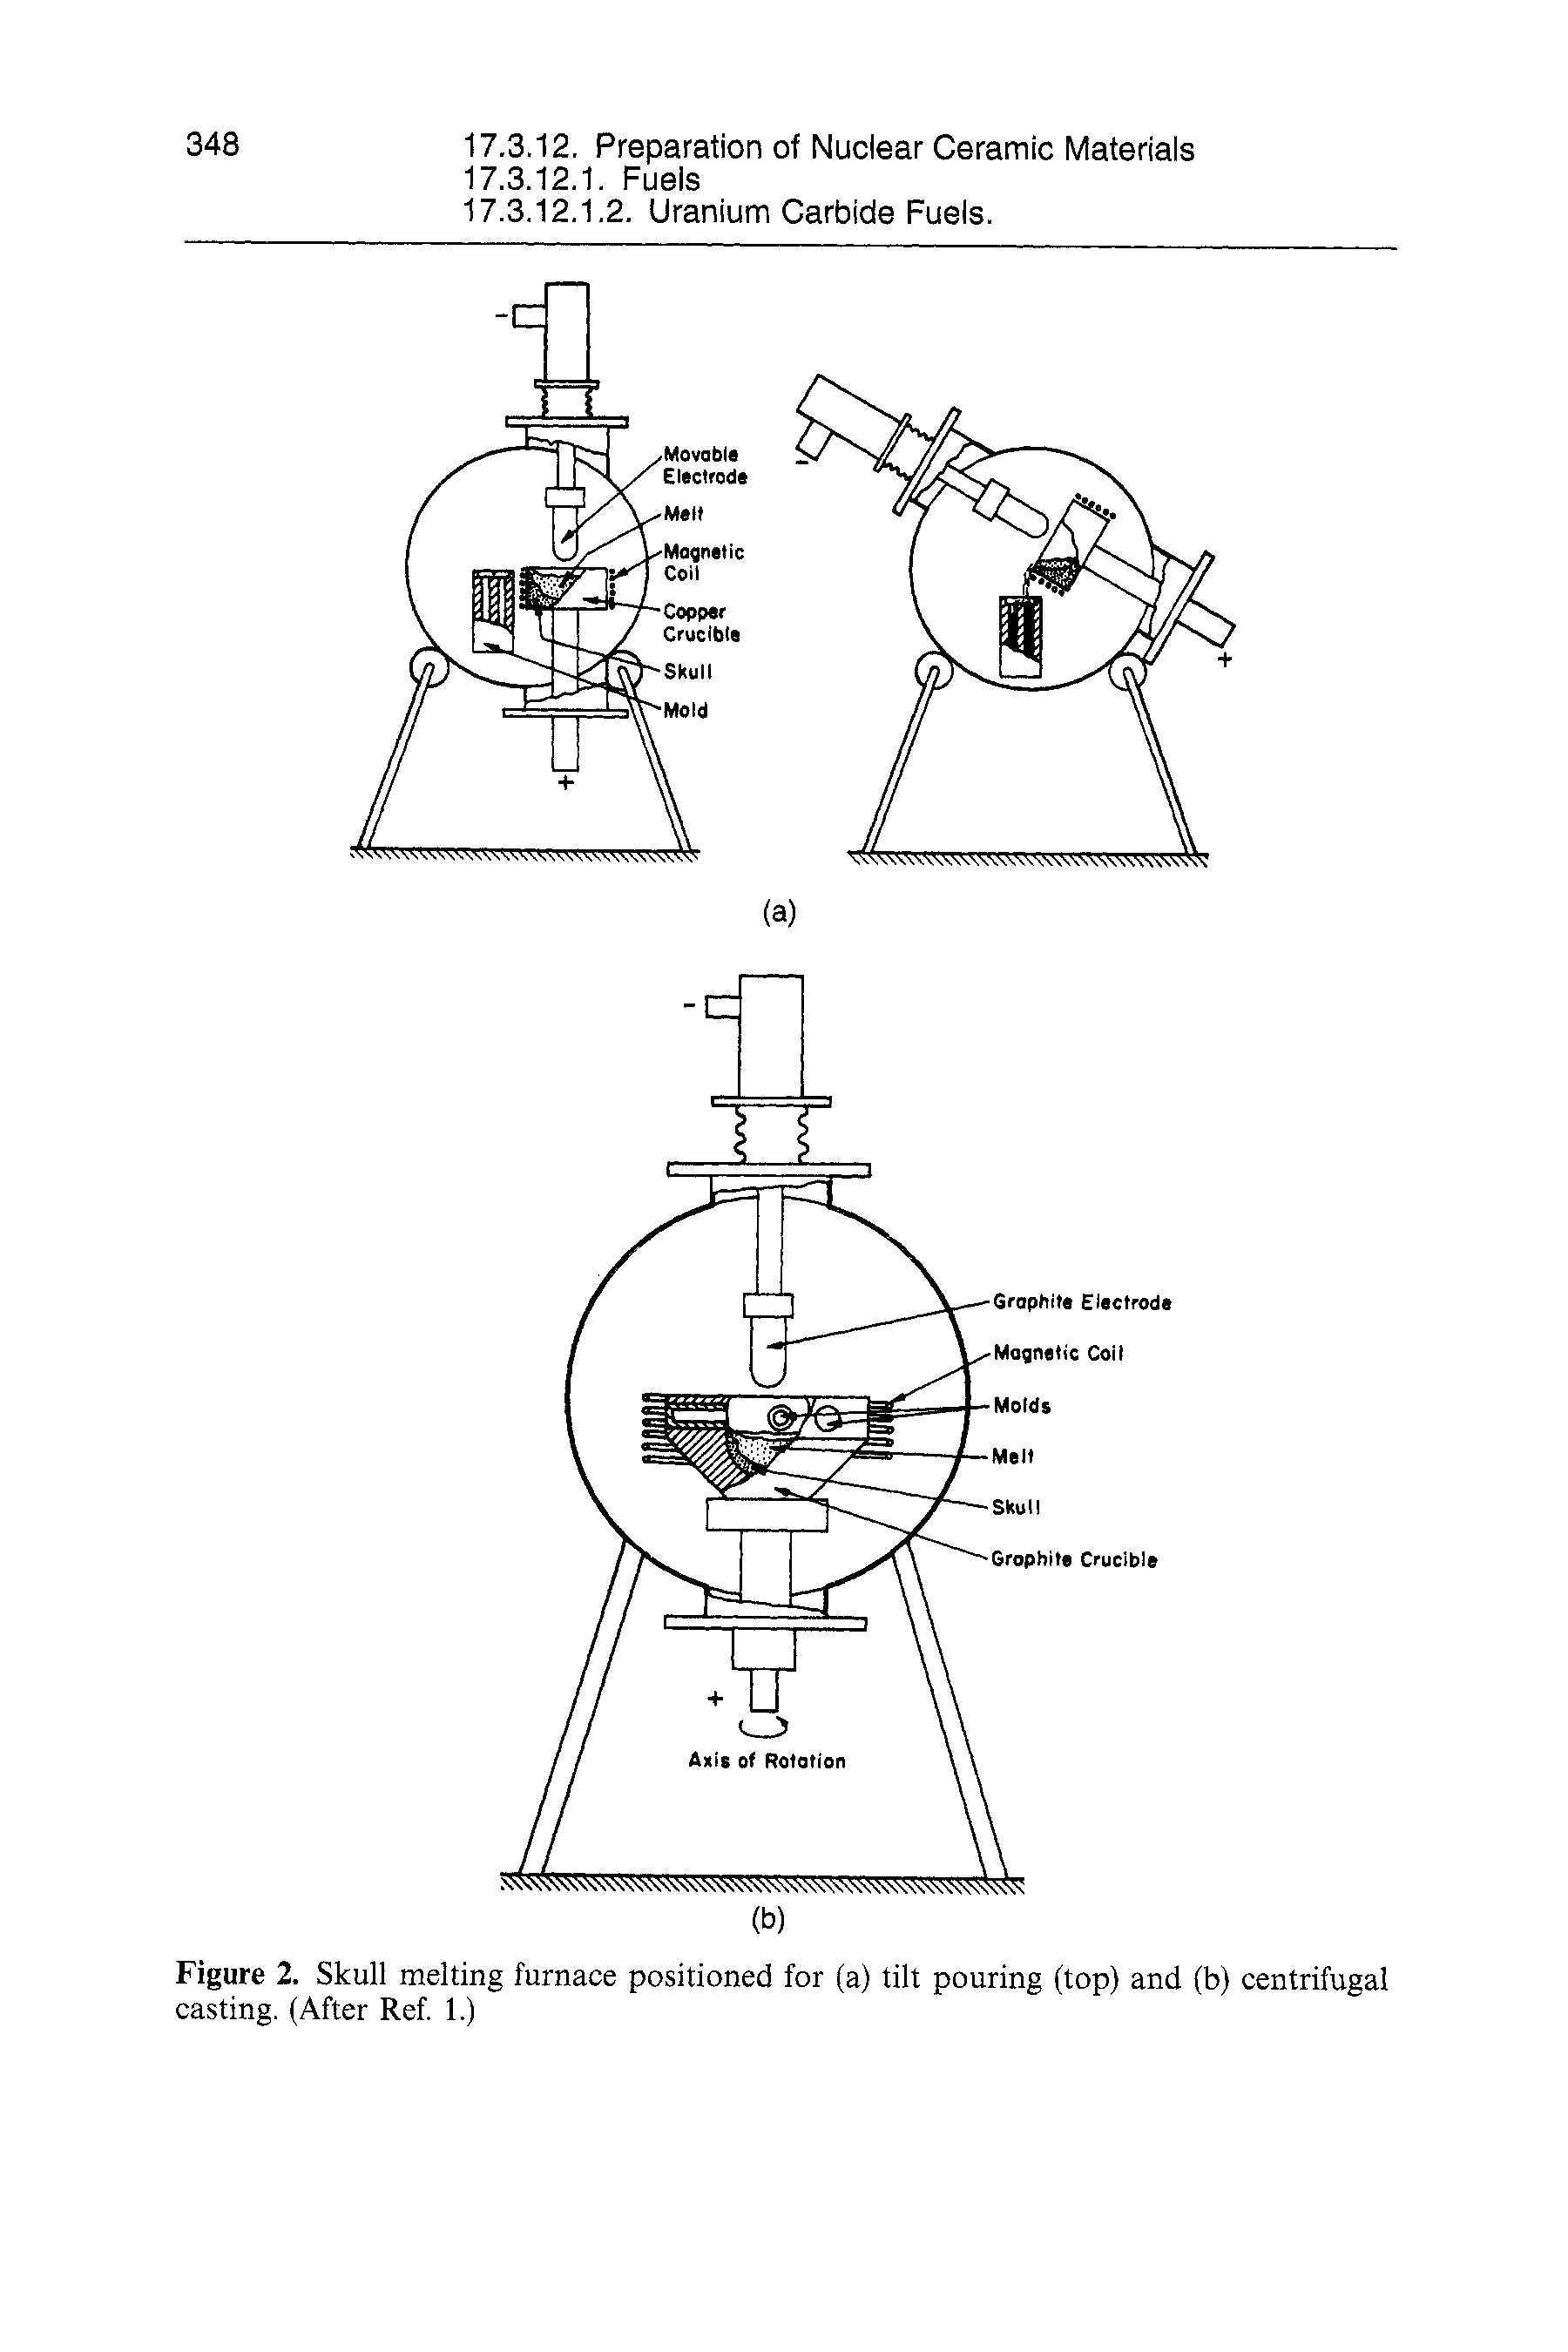 Figure 2. Skull melting furnace positioned for (a) tilt pouring (top) and (b) centrifugal casting. (After Ref. 1.)...